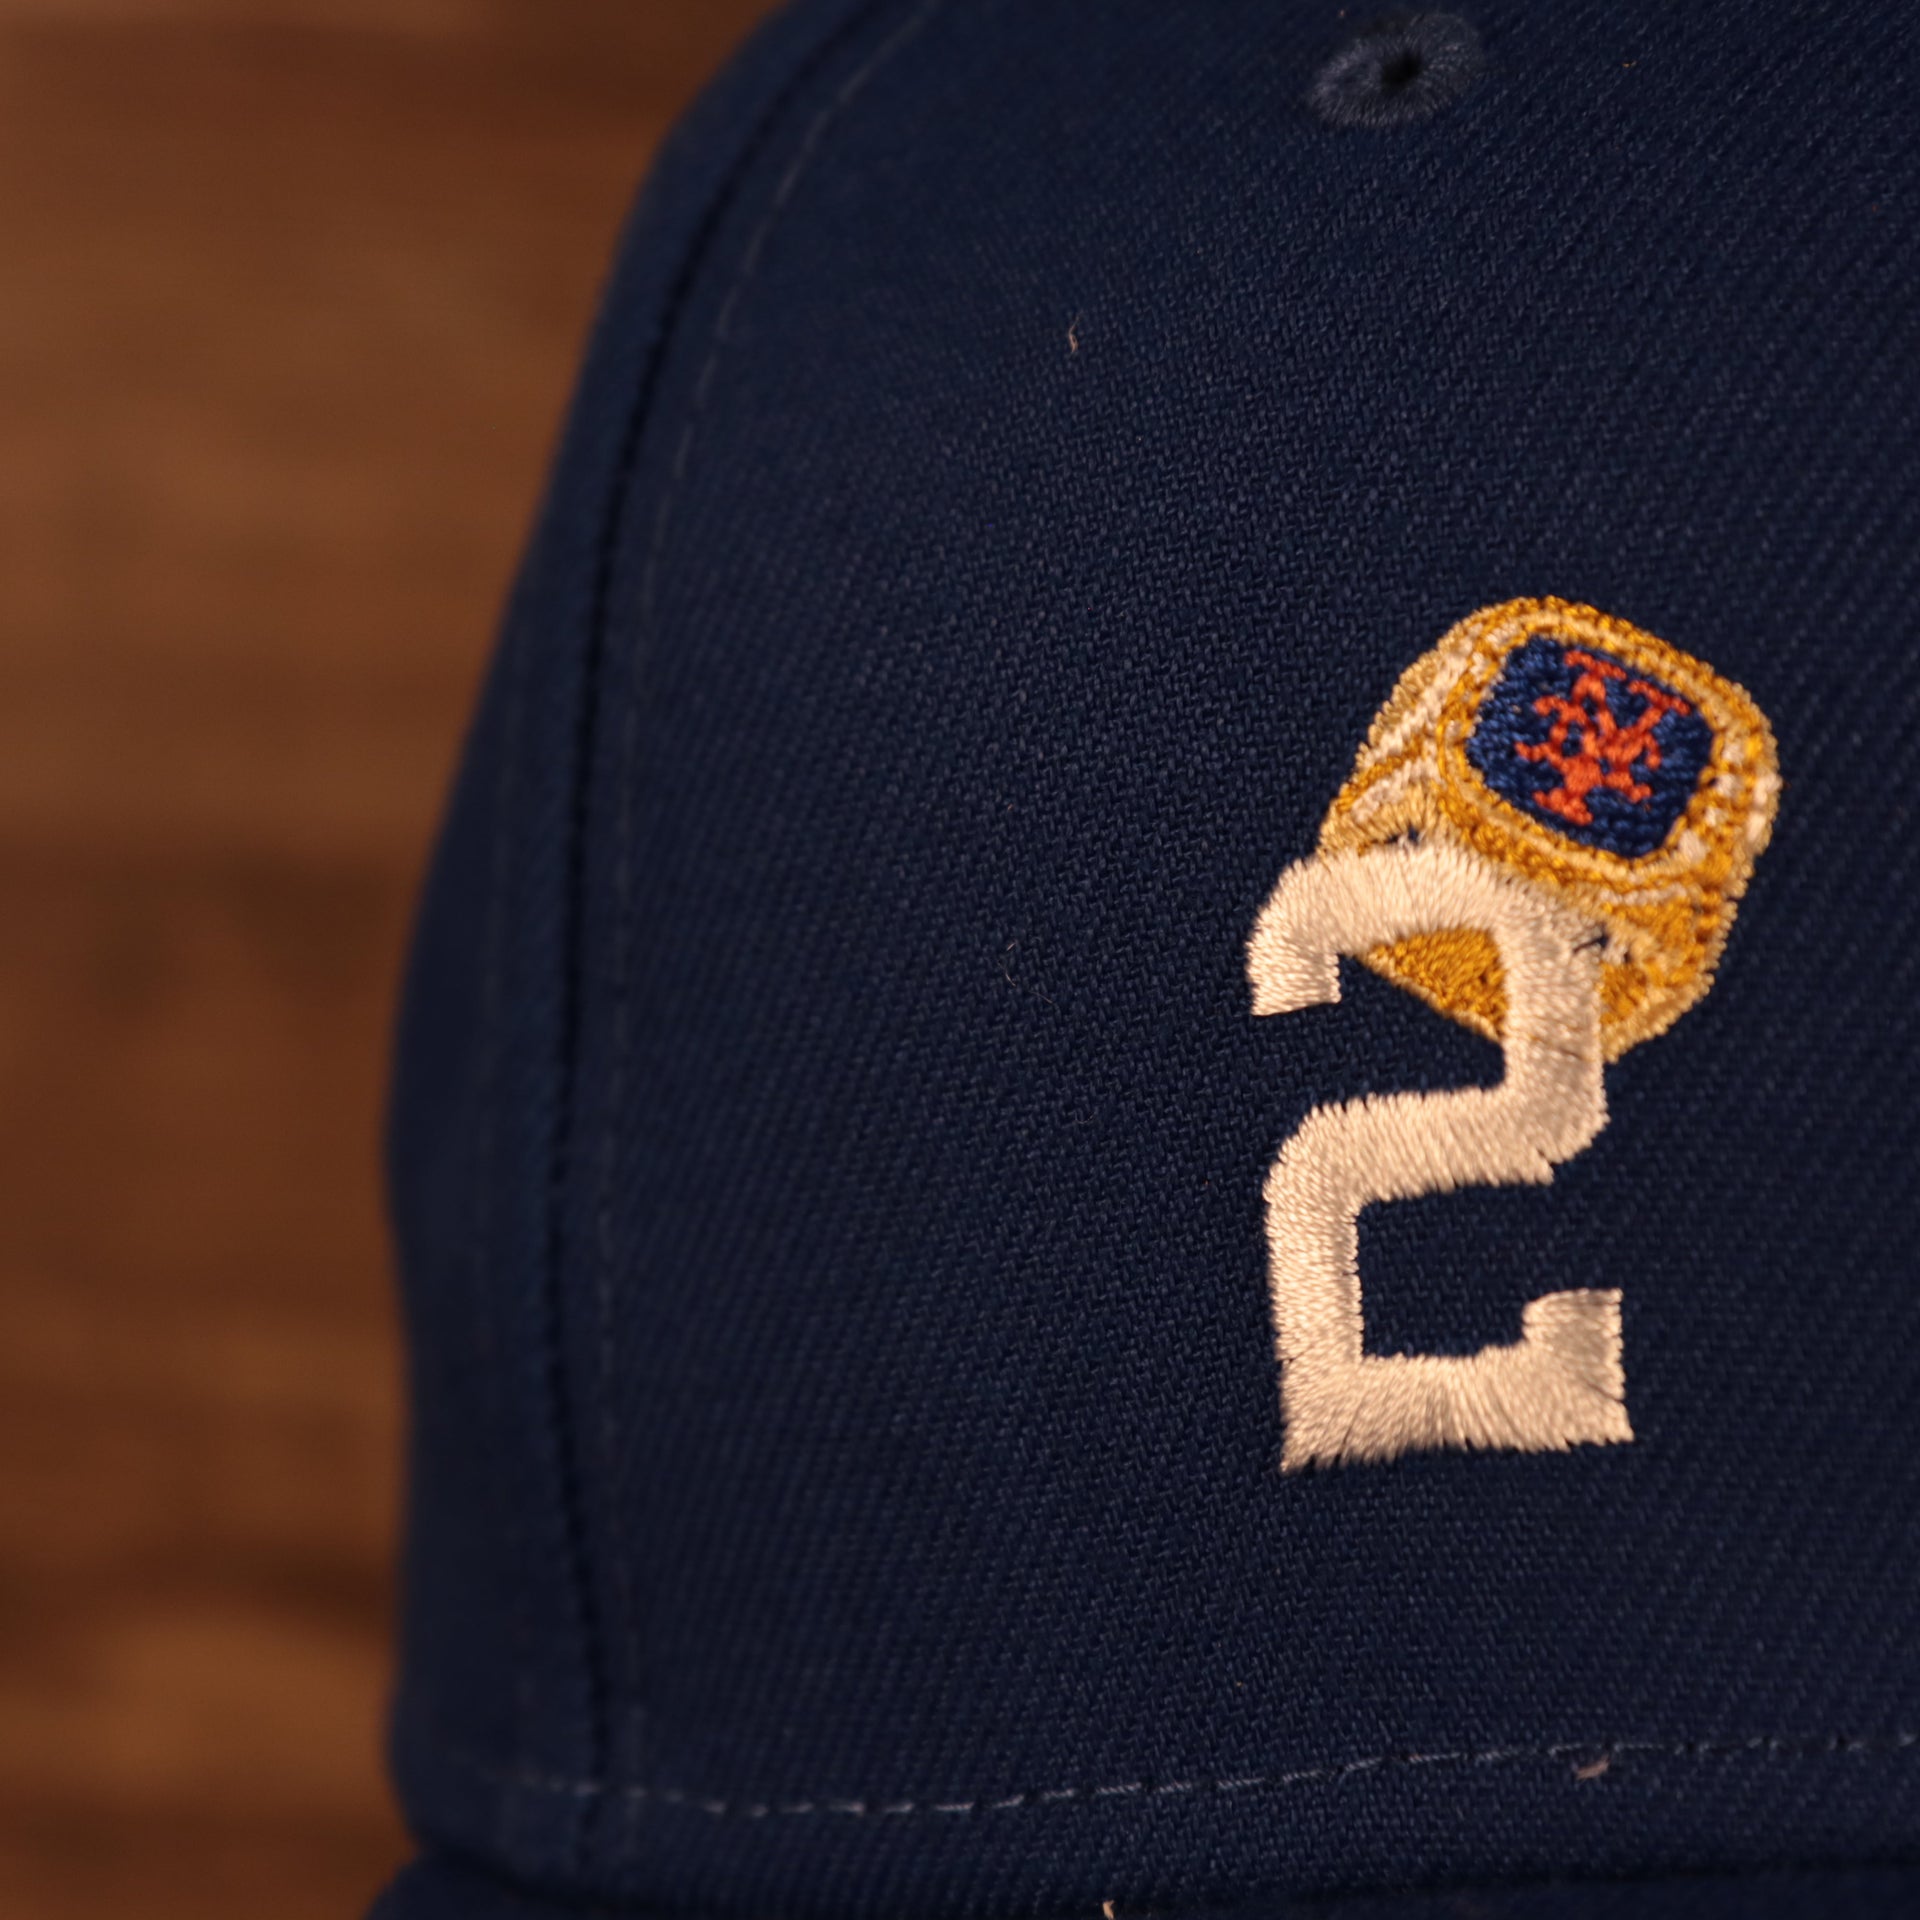 number 2 patch New York Mets Cooperstown "Championship Rings" All Over Side Patch Gray Bottom 59FIFTY Fitted Cap